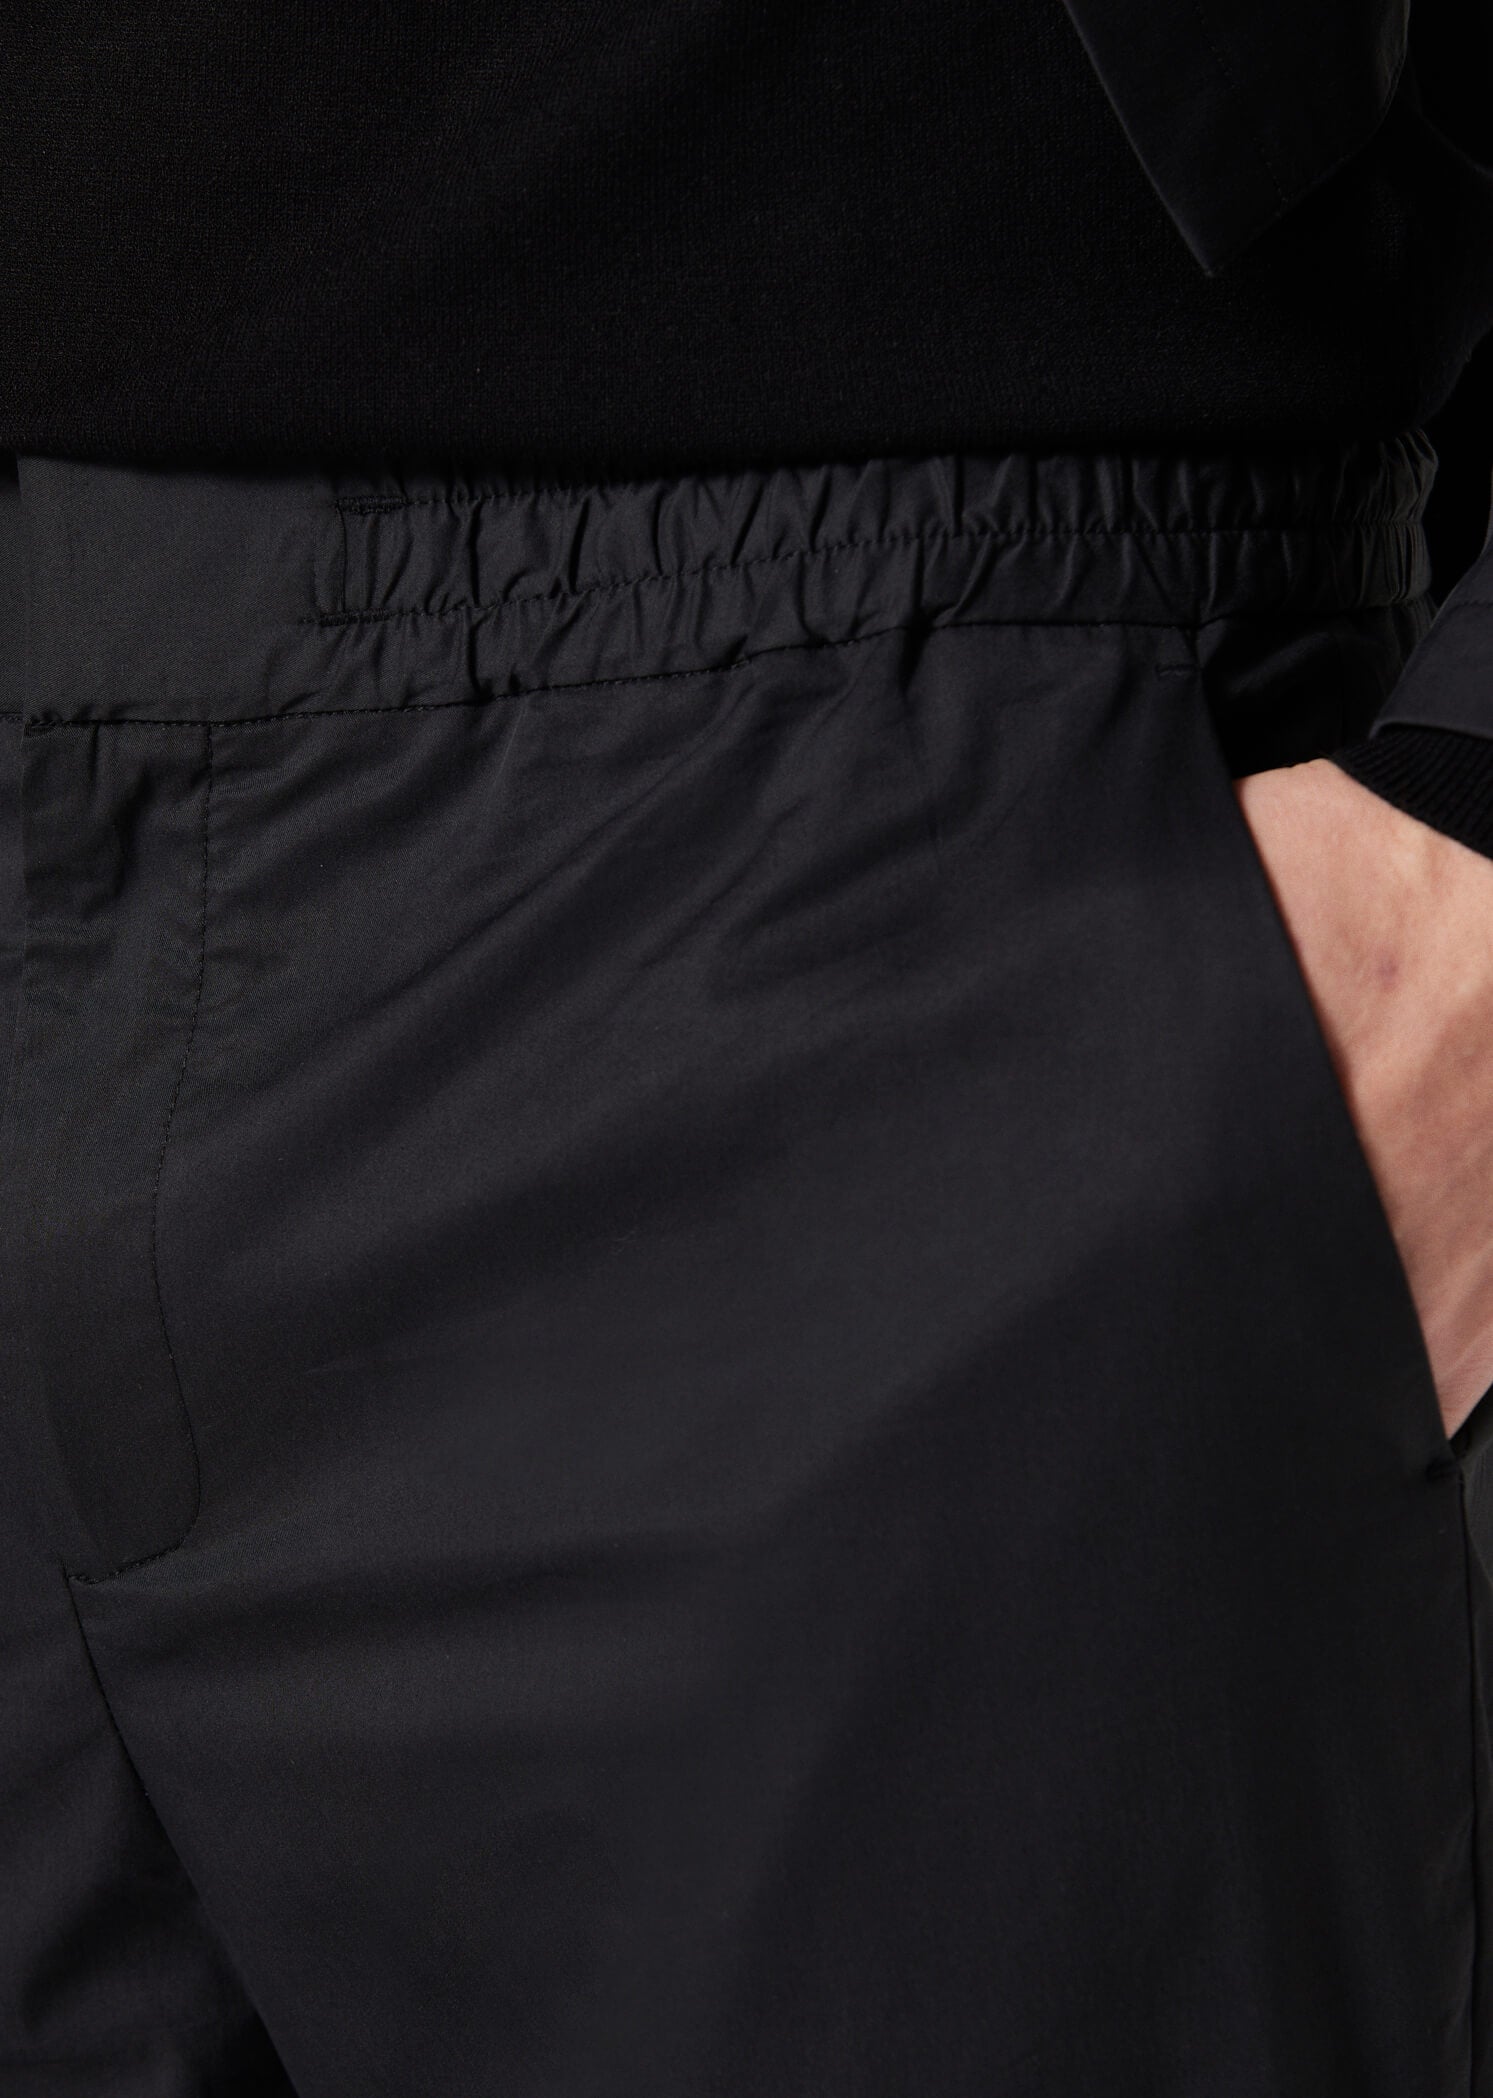 Hackforth Black Stretch Formal Trousers